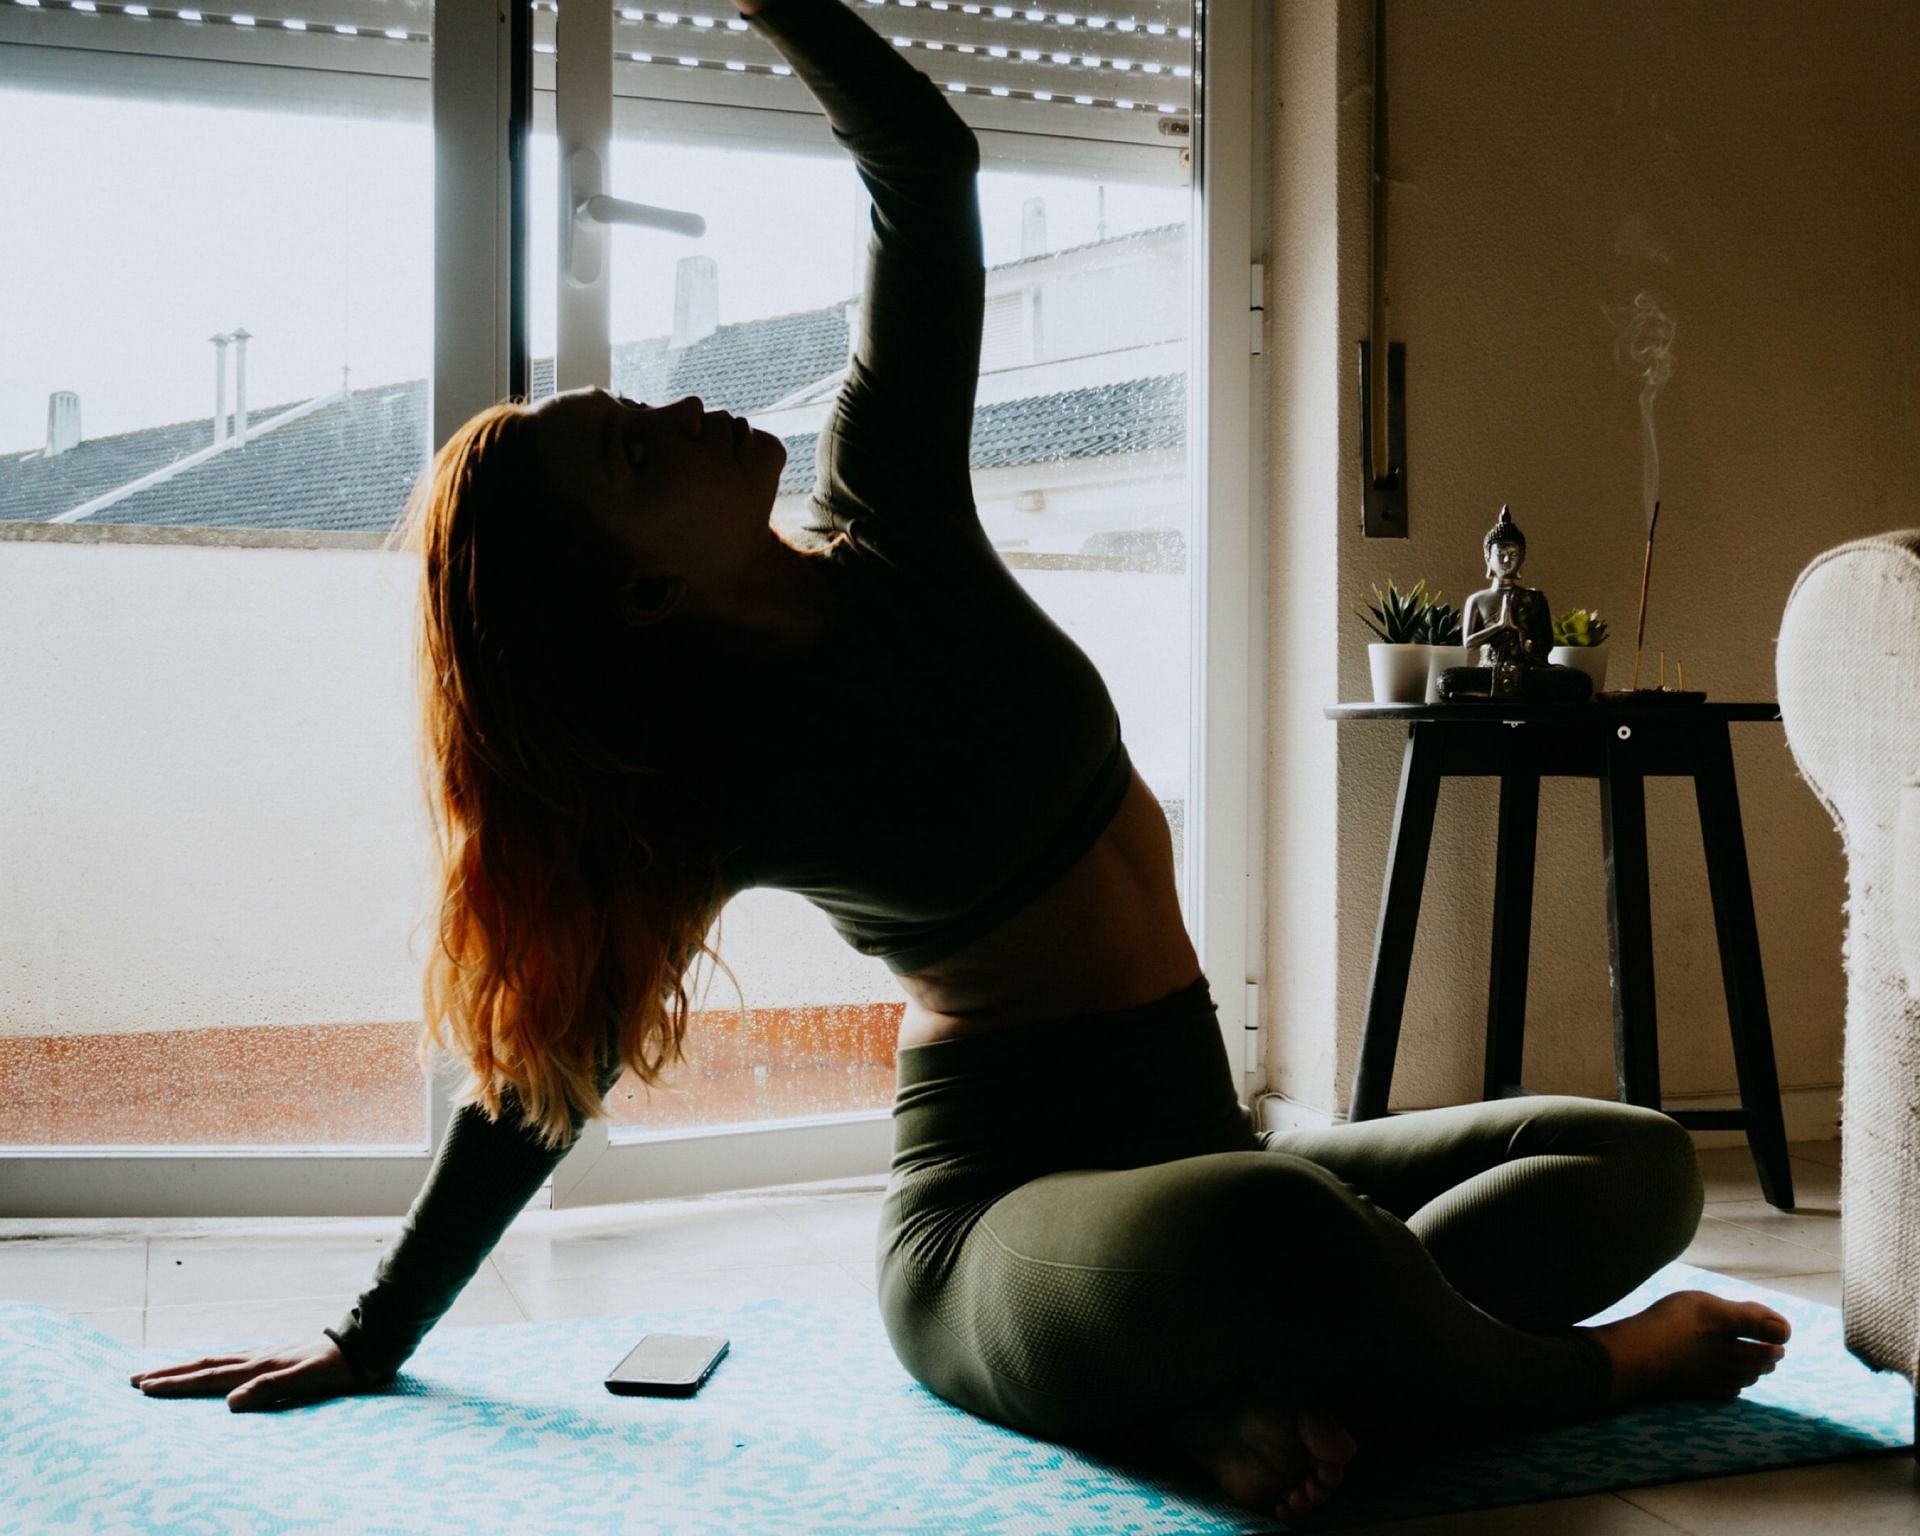 You can perform this exercise anywhere. (Image via Unsplash / Akemy Mory)